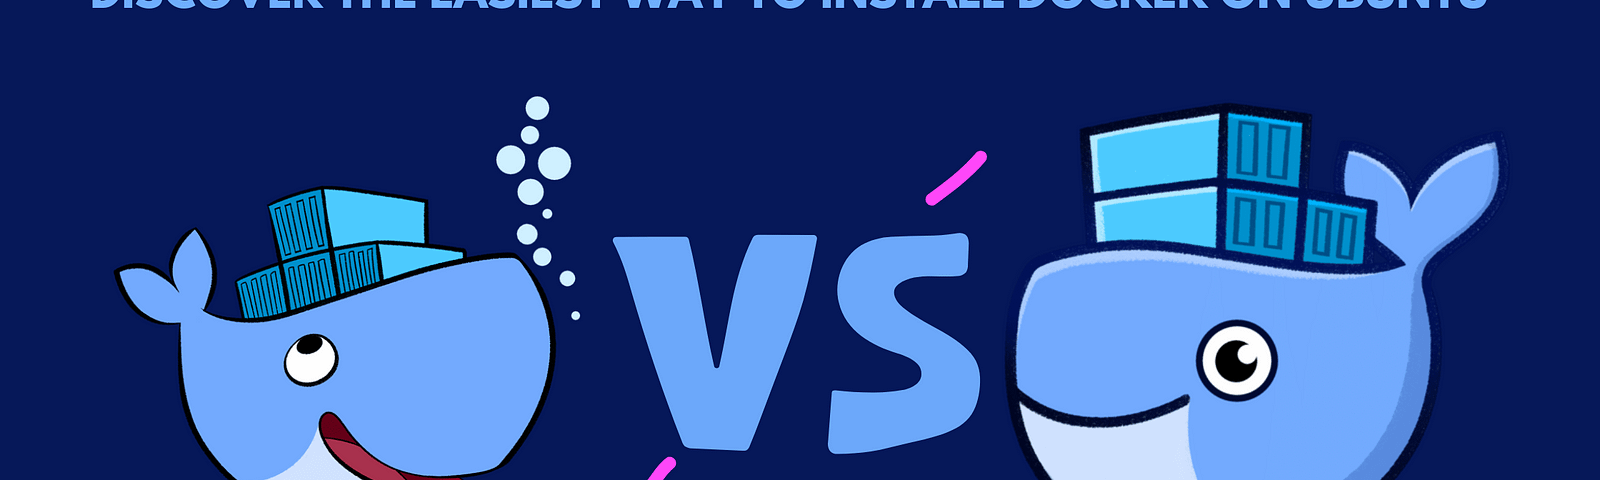 docker logos face off for comparision